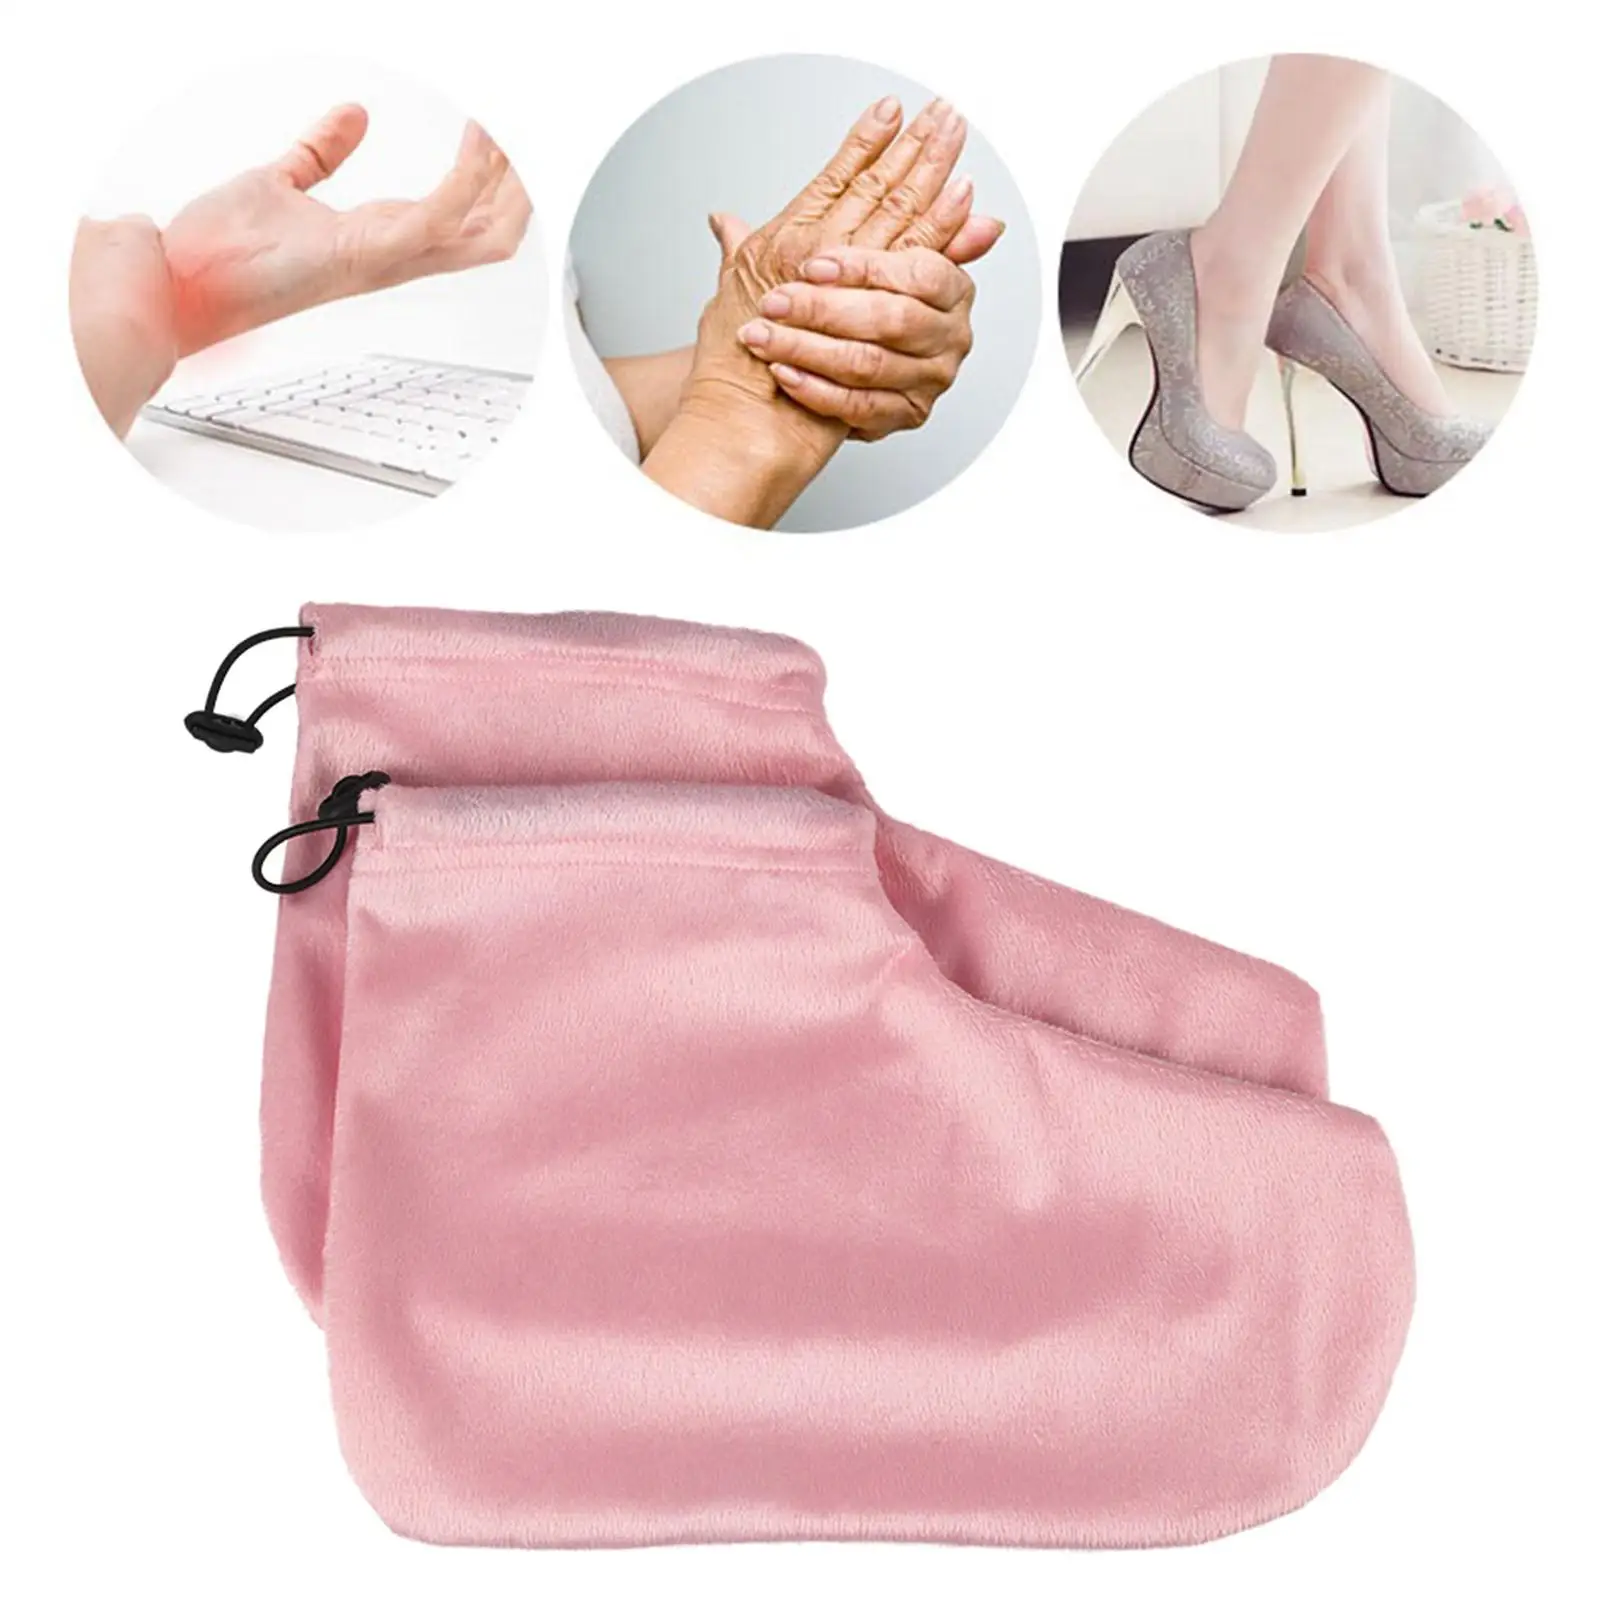 2 Pieces Paraffin Wax Mitts for Hand and Feet Moisturizing Infrared Machine Keep Warm Heat Wax Mitten Cover Bags Foot SPA Liners